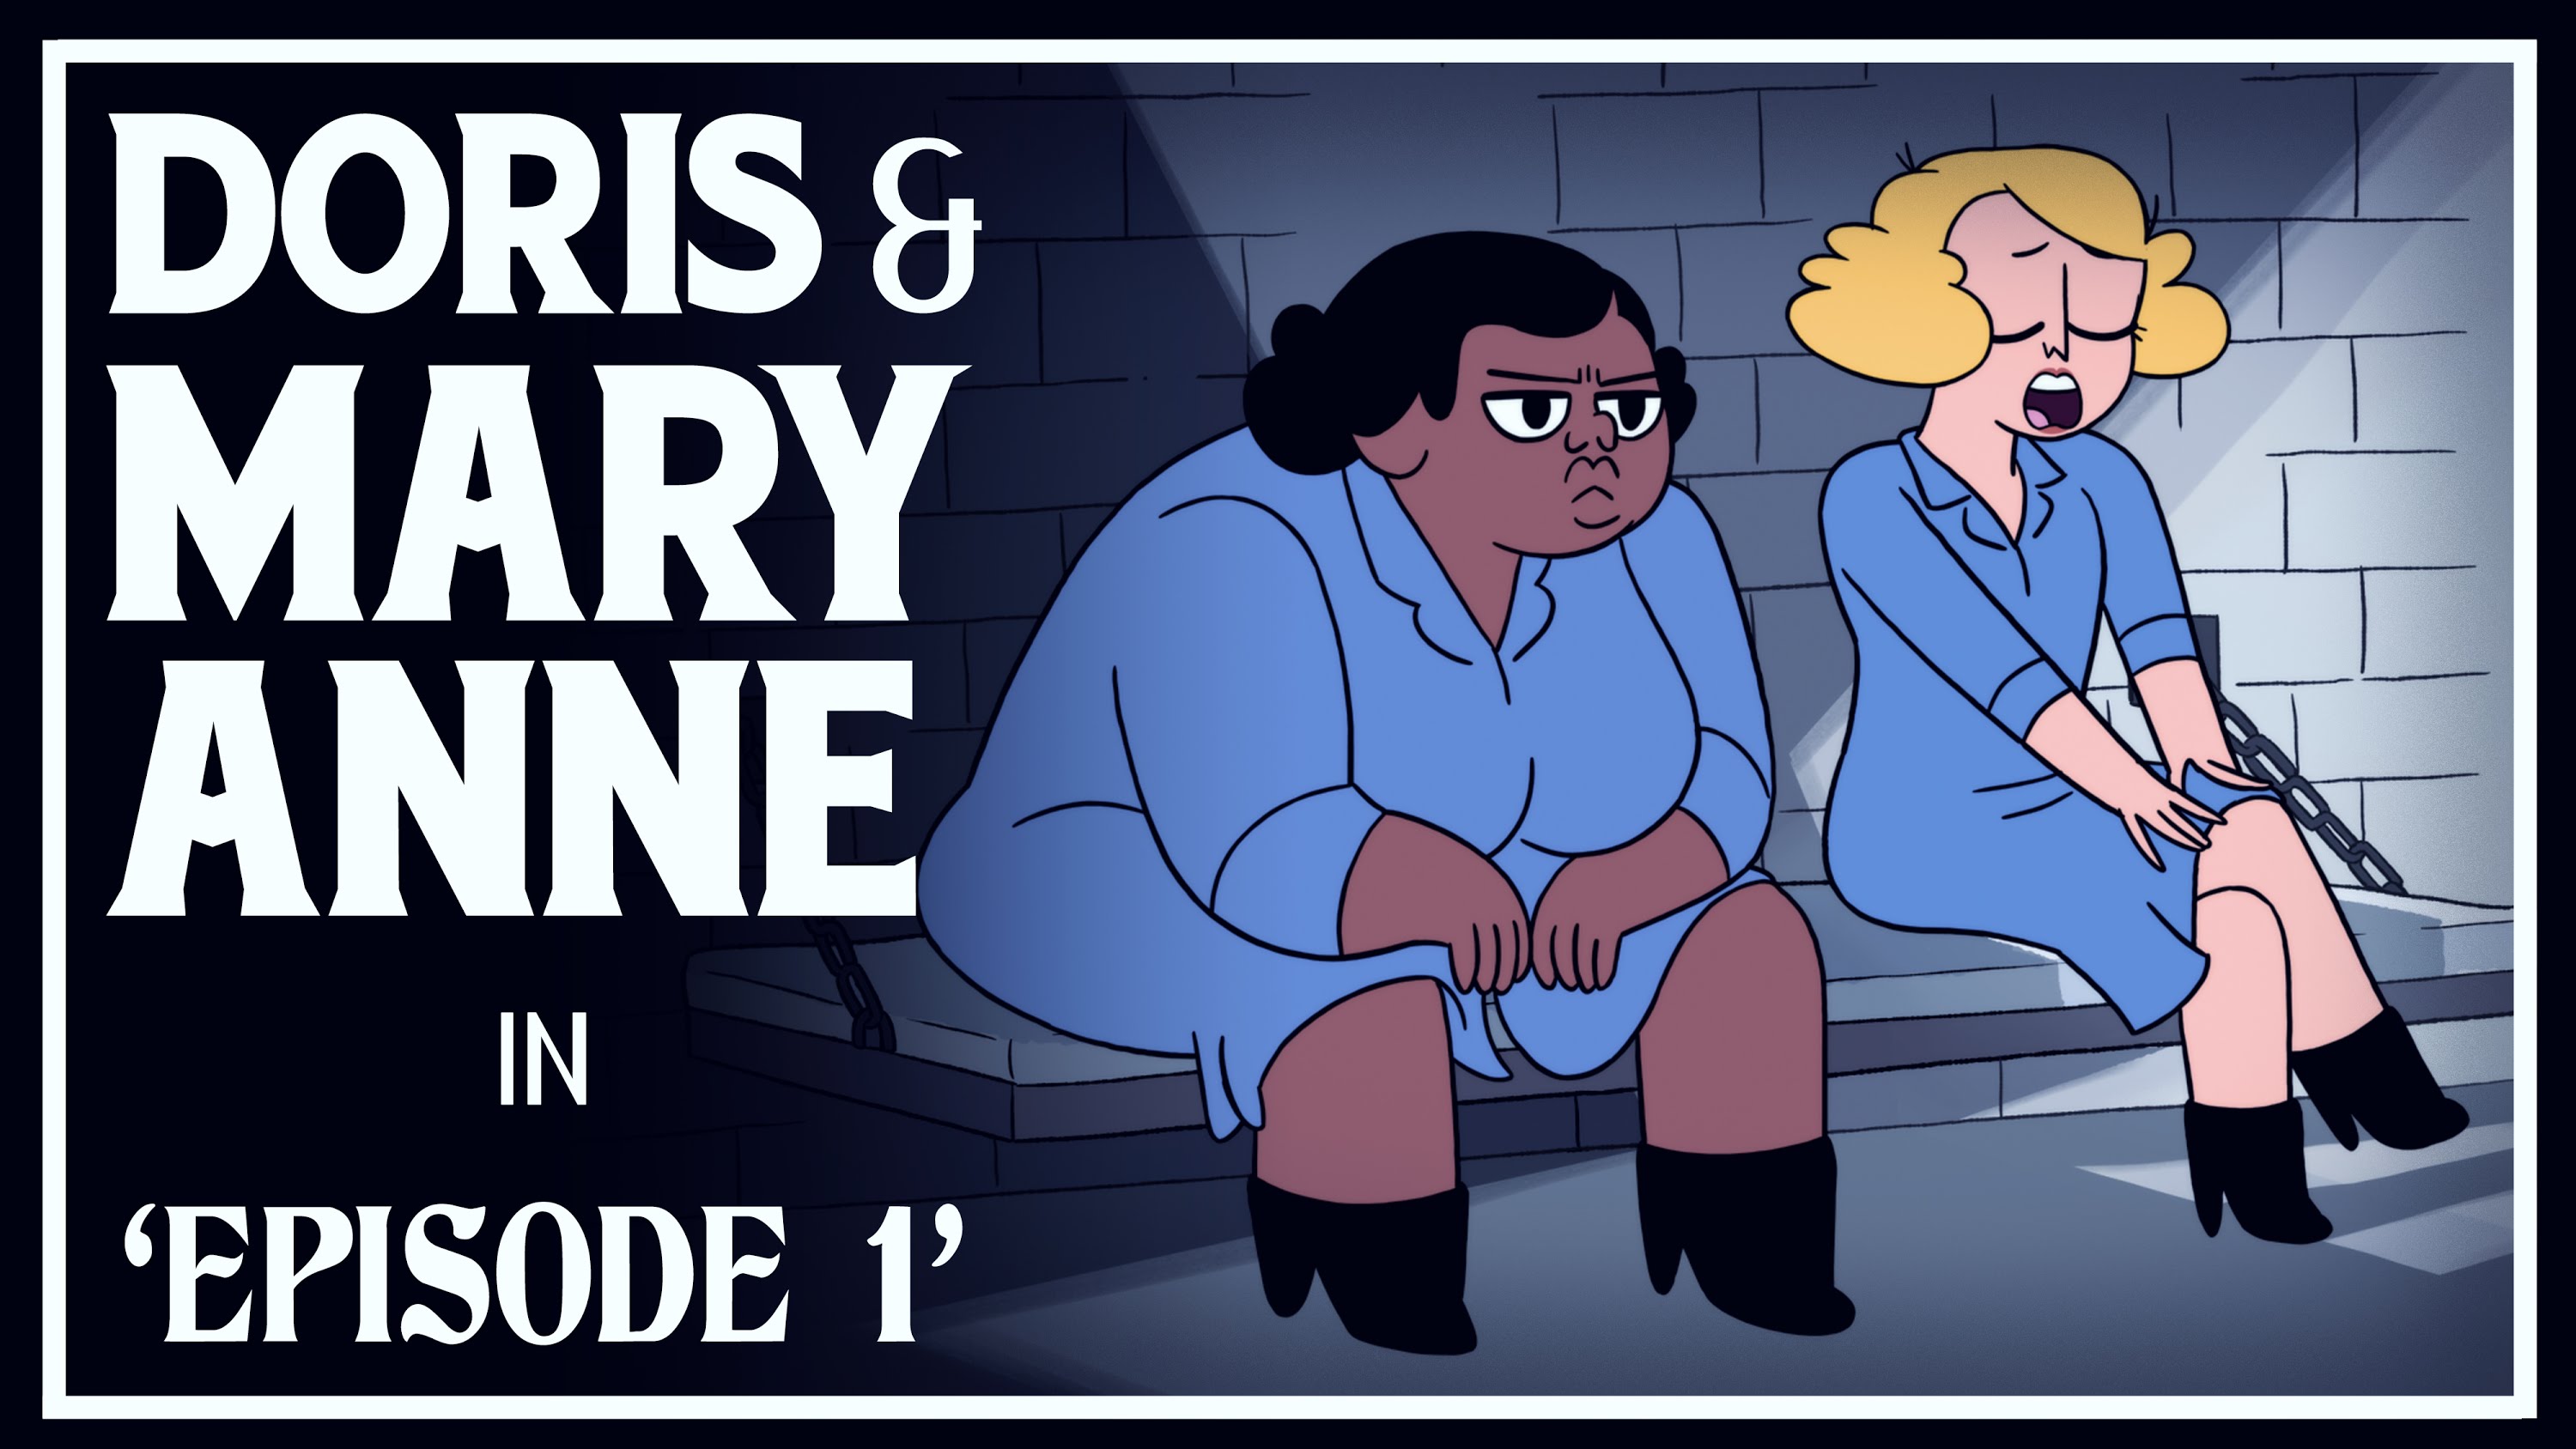 Doris & Mary-Anne Are Breaking Out Of Prison', An Animated Series About Two  Women Behind Bars in the Roaring 1920s